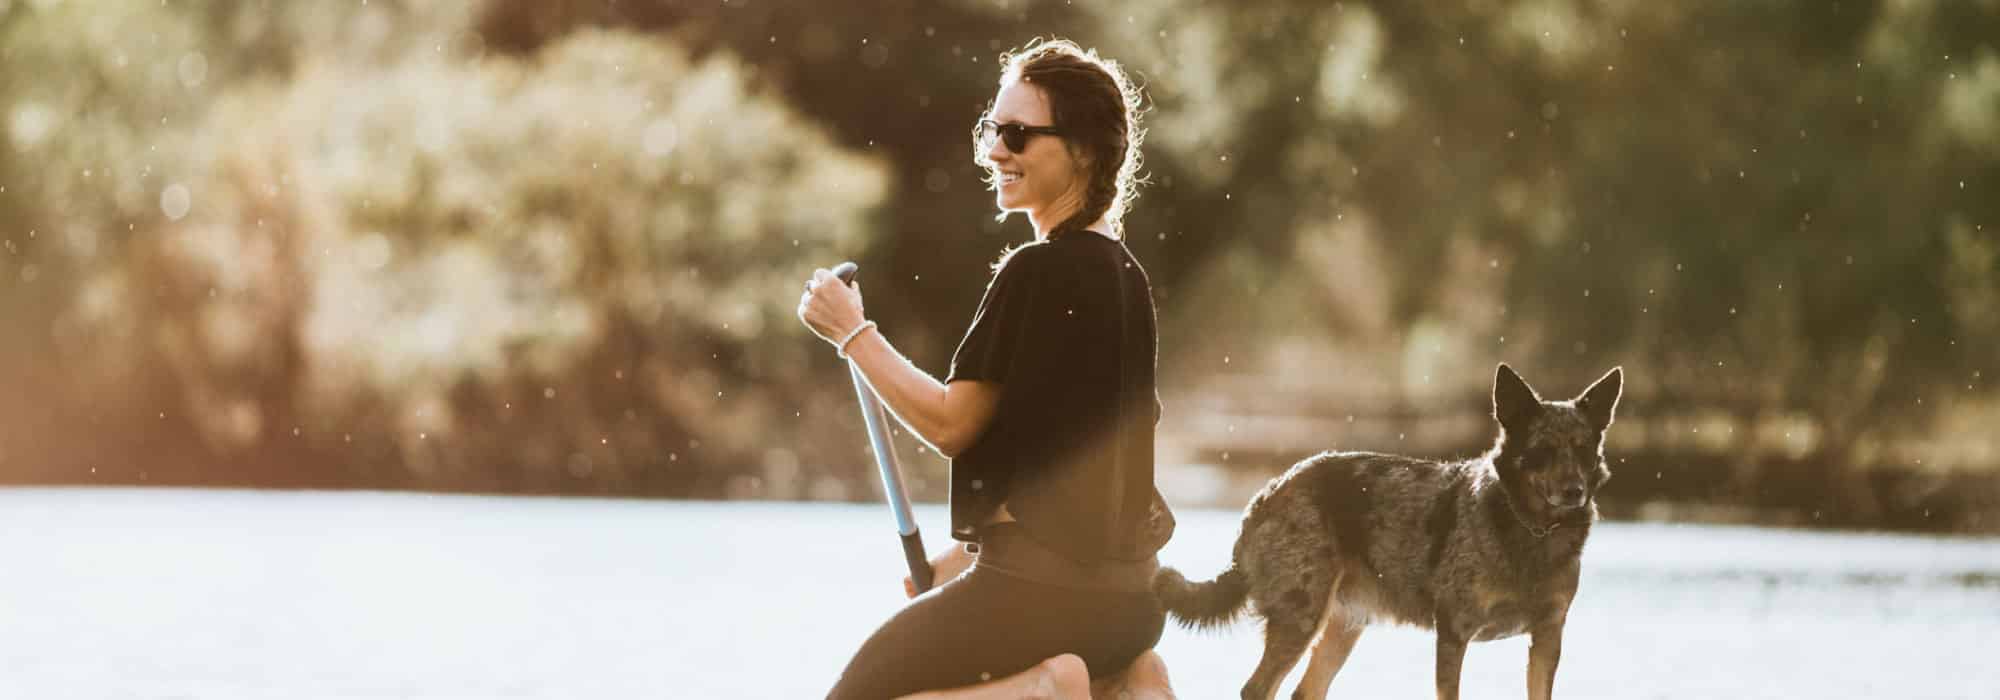 A woman on a paddle board with a dog.